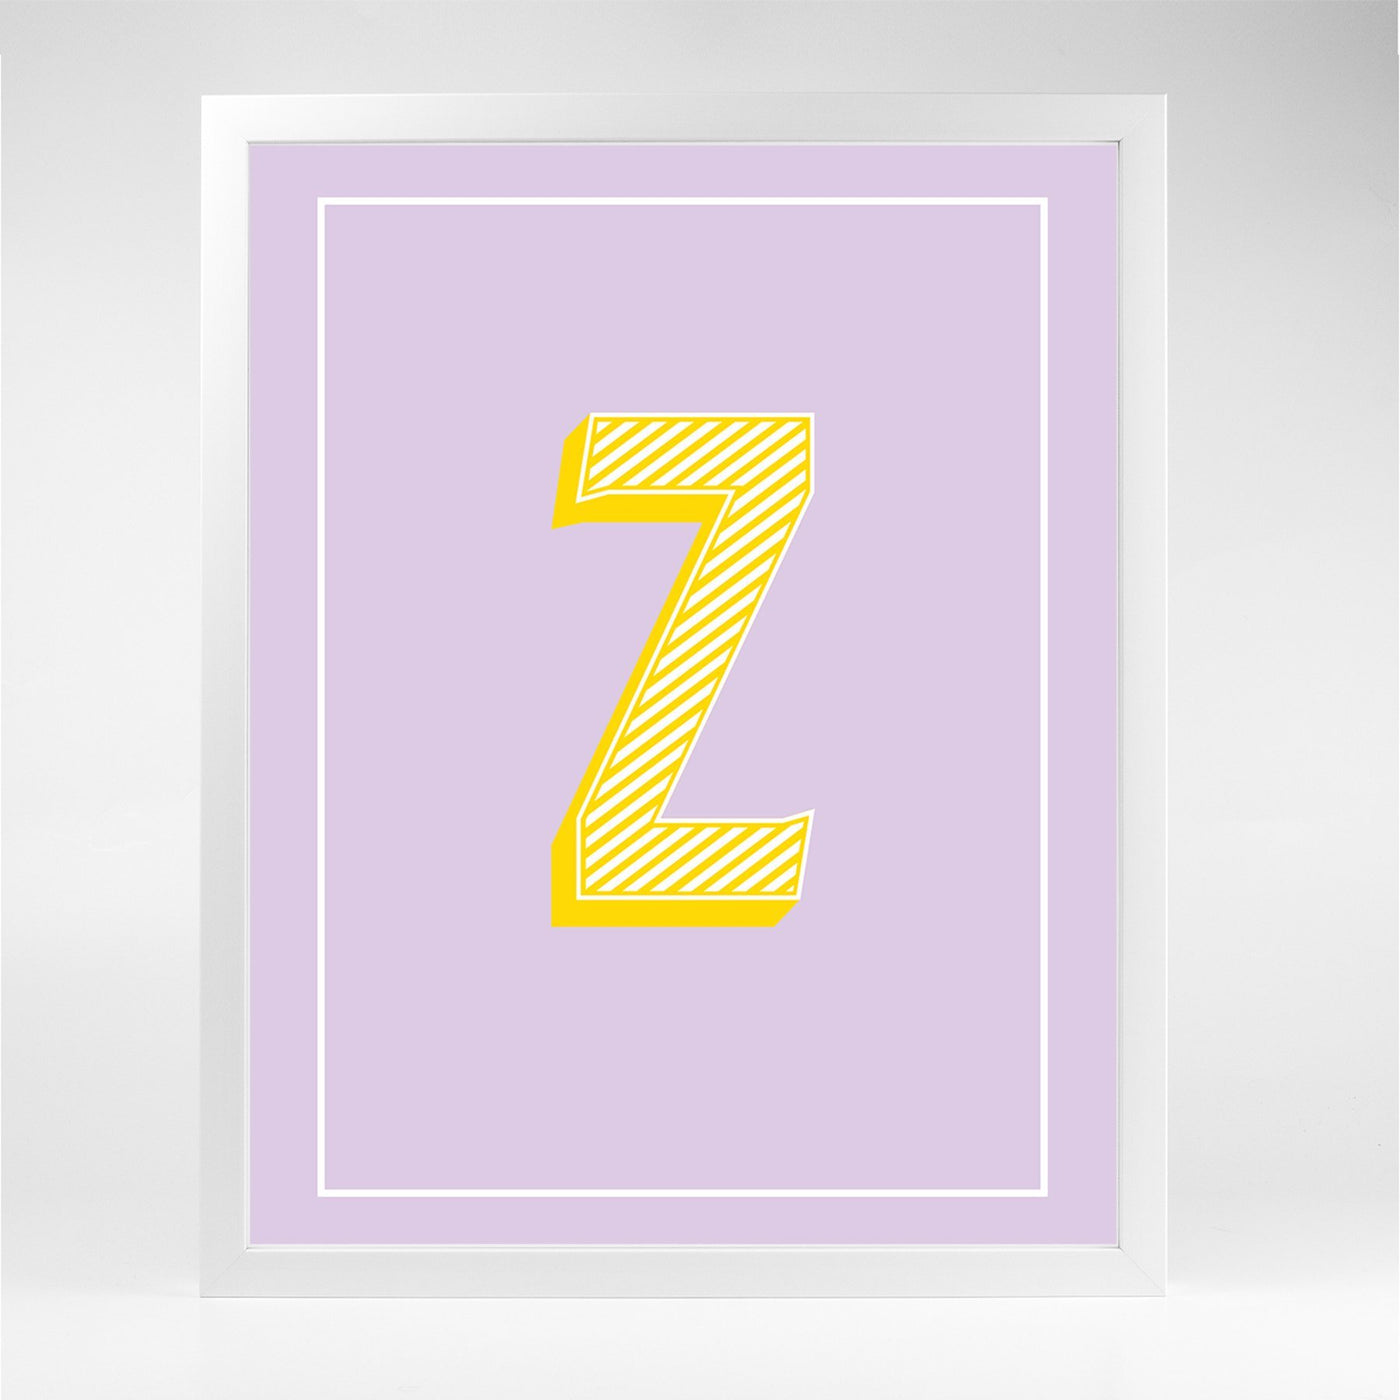 Gallery Prints Z The Letter Series Katie Kime